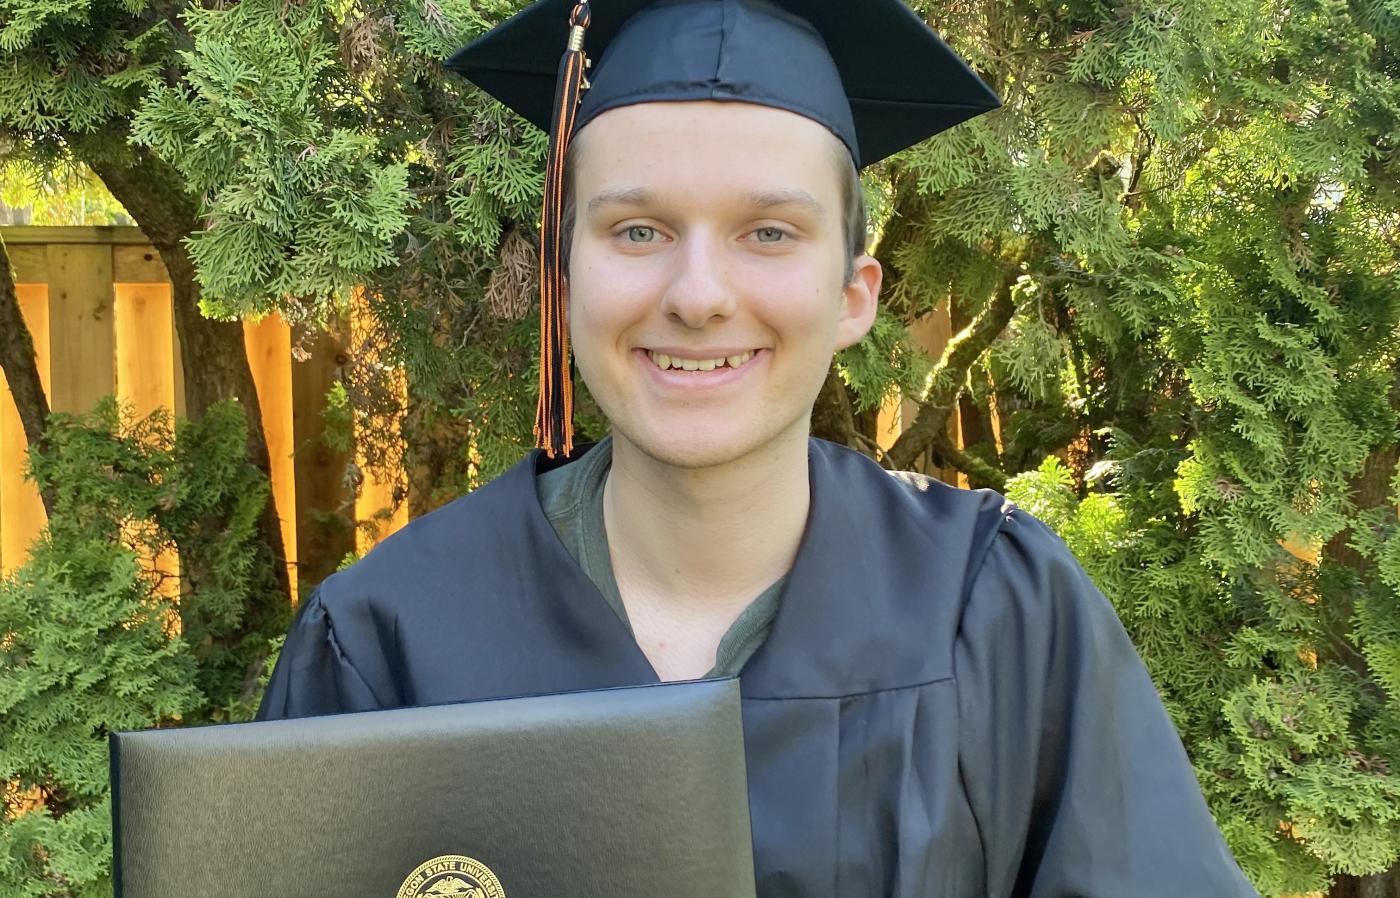 Person smiling wearing graduation cap and gown.